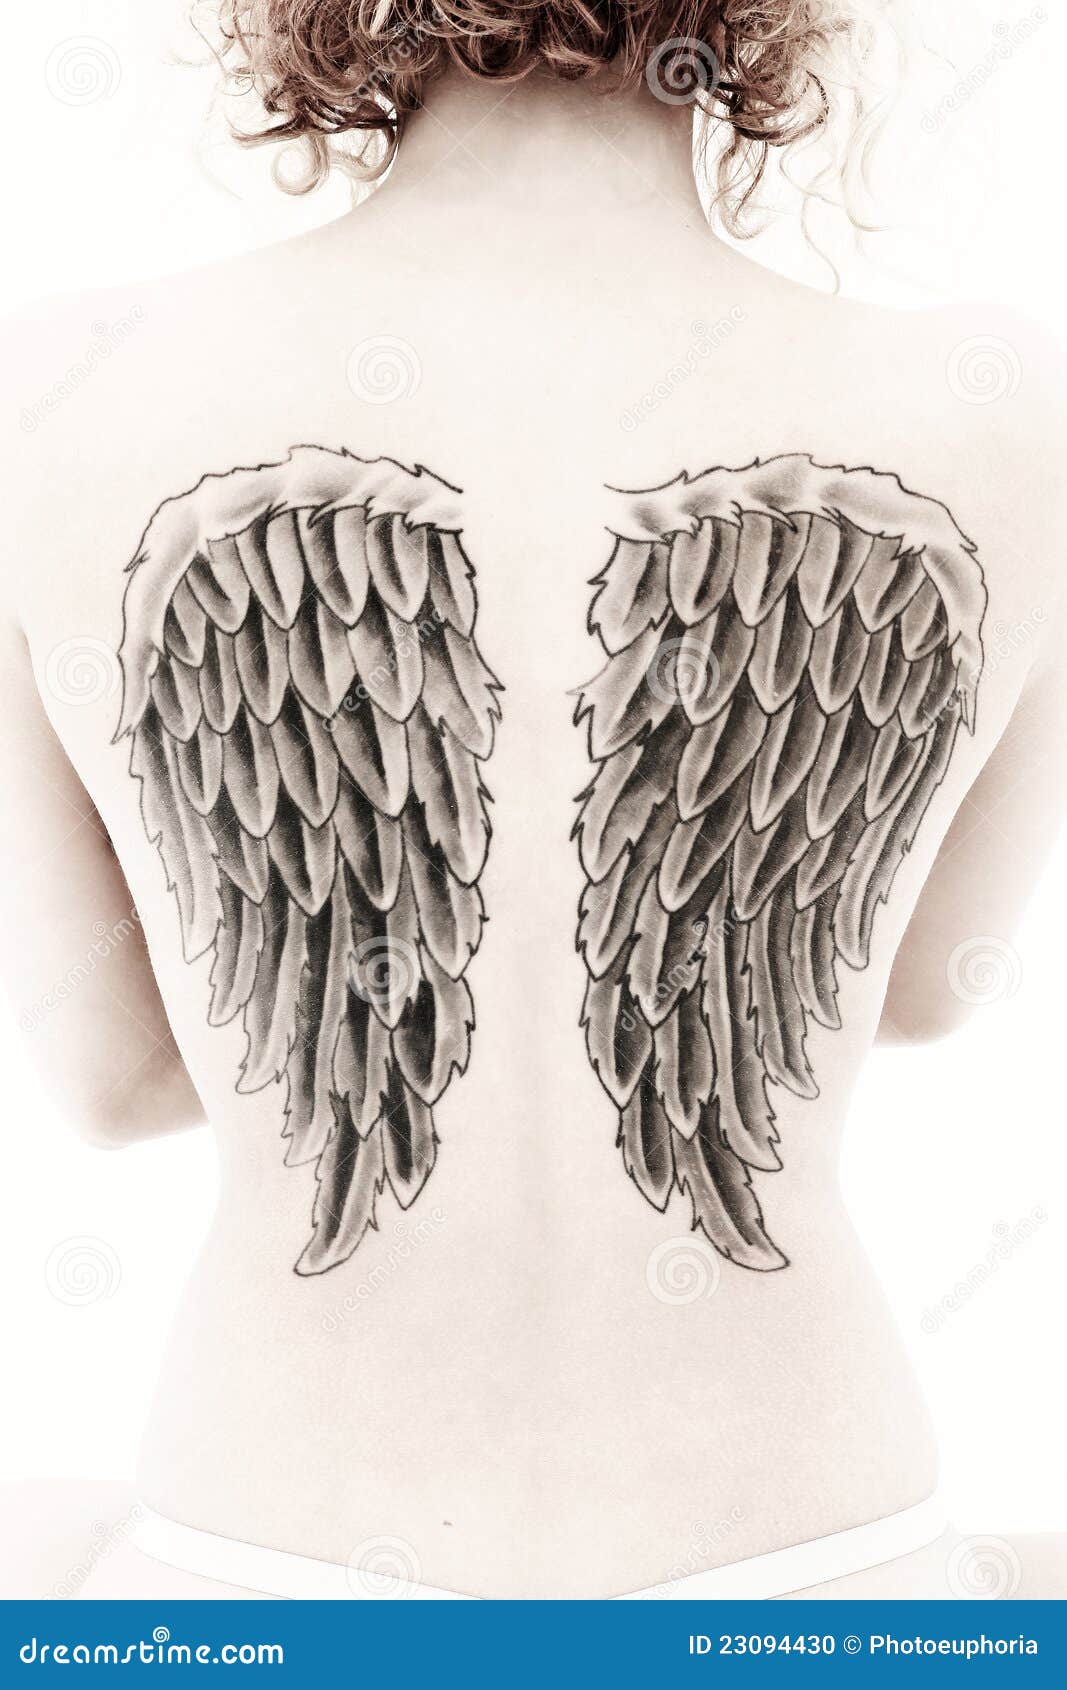 Wings Extra Large Tattoo – Tattoo for a week